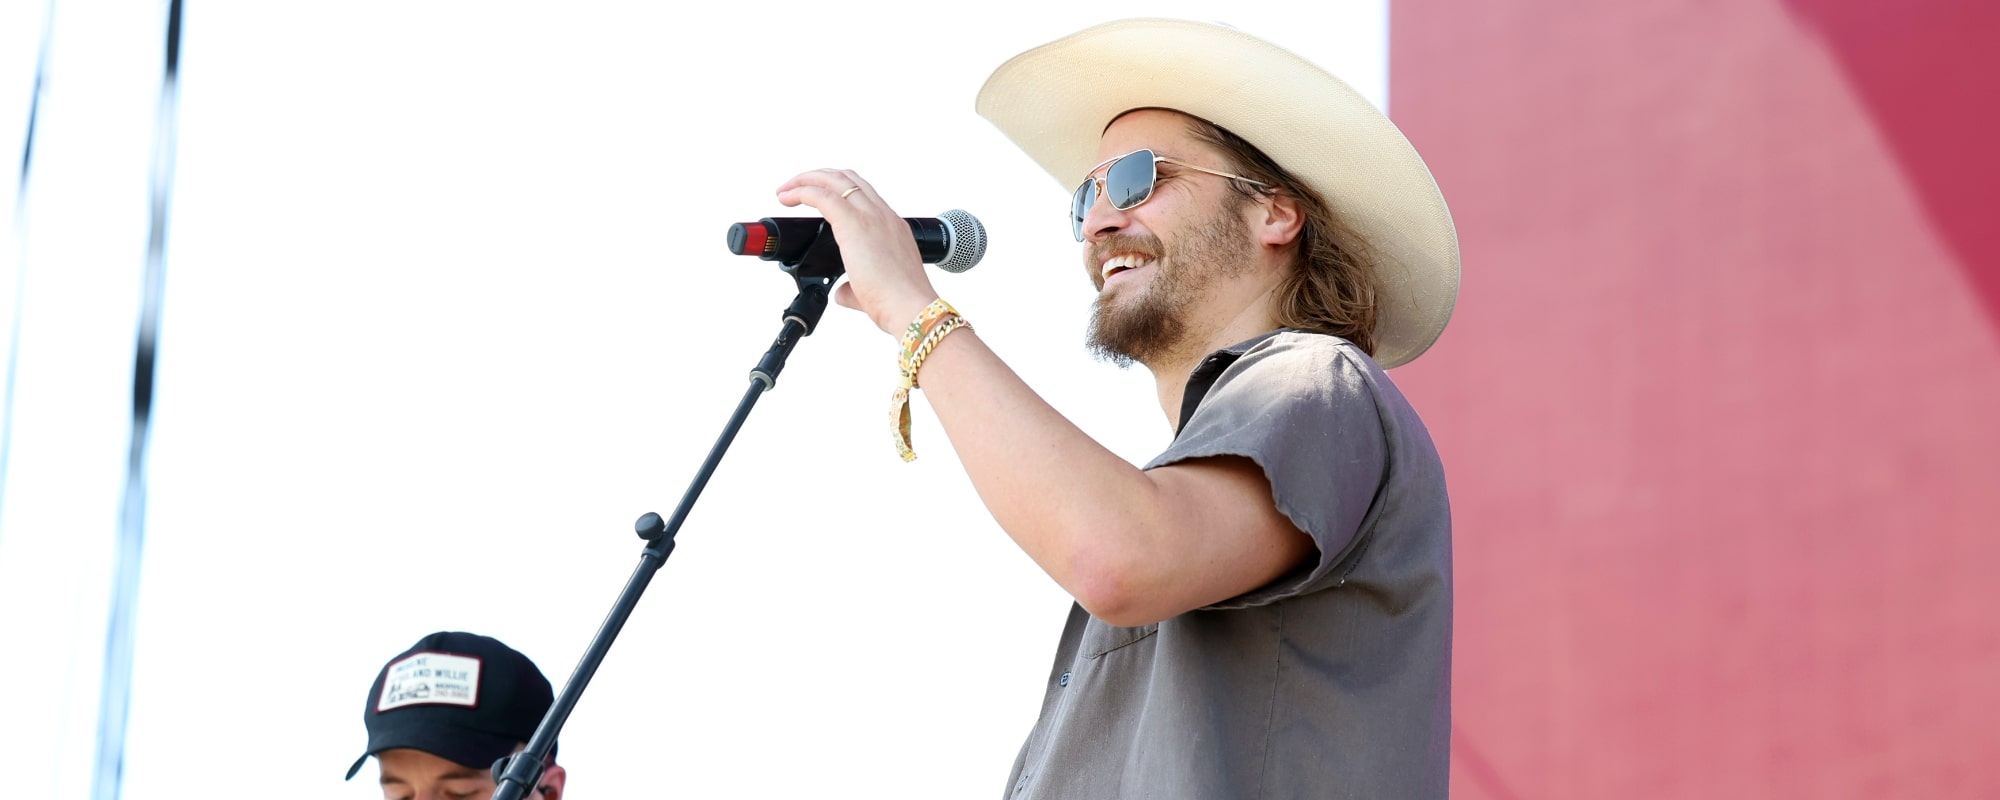 Yellowstone’s Luke Grimes Opens Up About Complicated Relationship with Hometown, Talks Being Inspired by Ryan Bingham